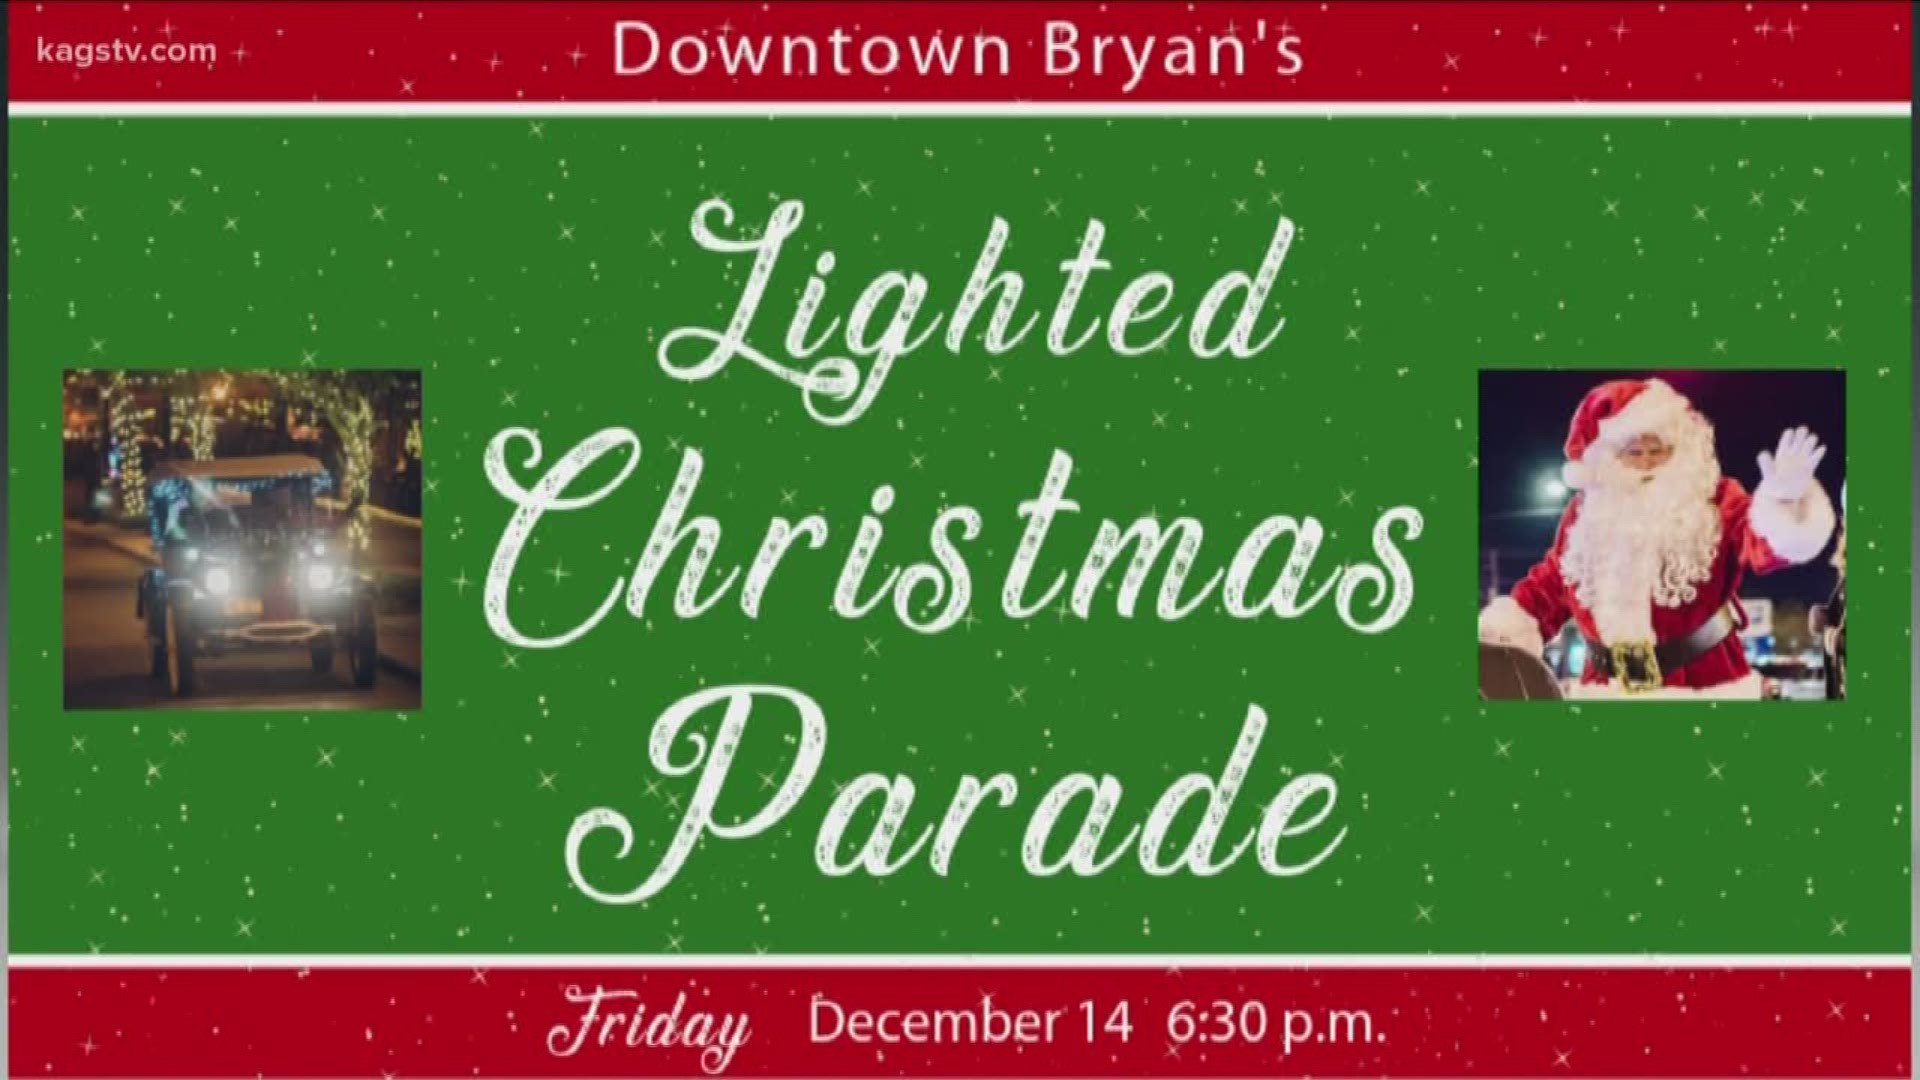 The Downtown Bryan Lighted Christmas Parade is this Friday, December 14th.